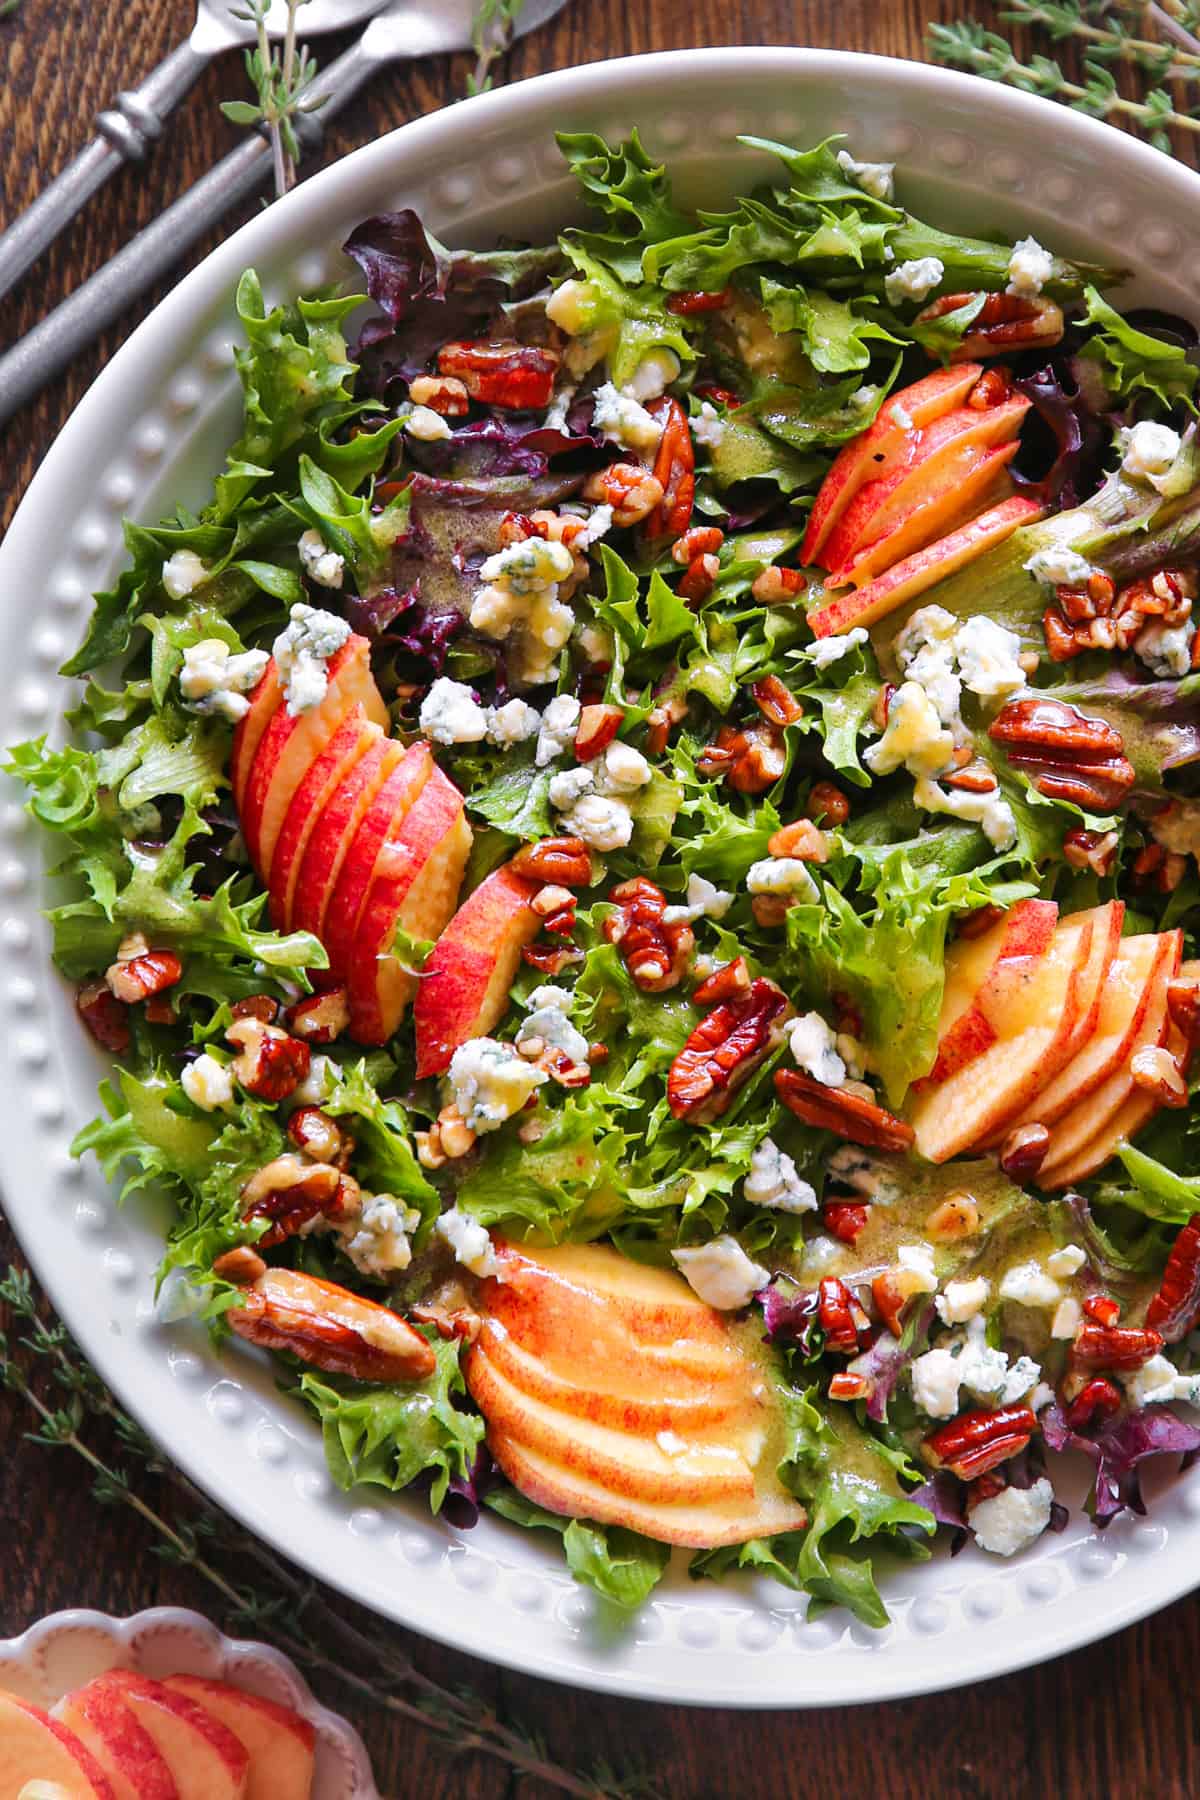 Green Salad with Apples, Blue Cheese, Pecans, Mixed Greens, and Honey-Lemon Dijon Mustard dressing - in a white bowl.